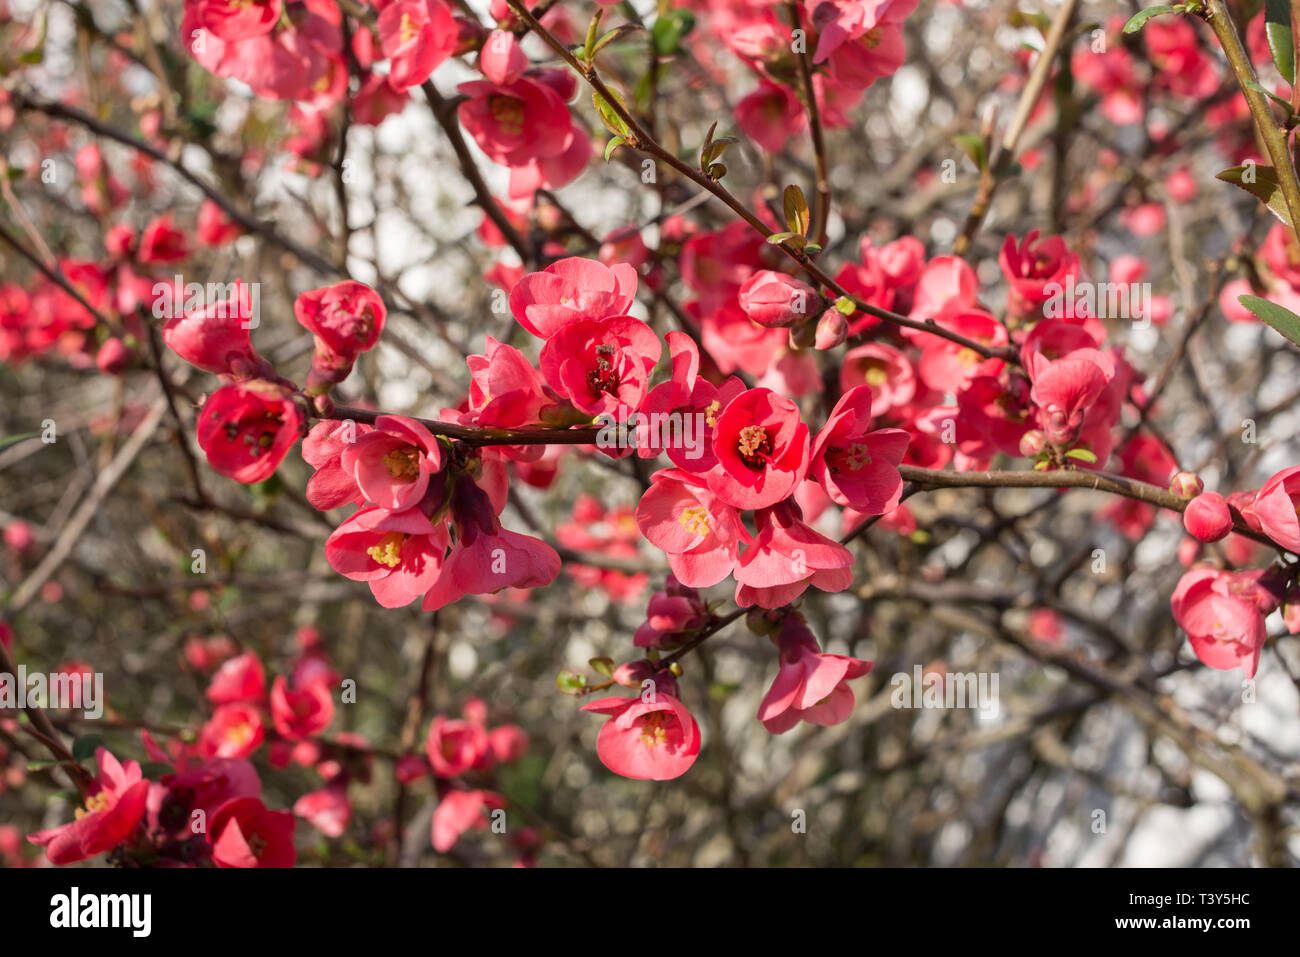 Chaenomeles speciosa, Japanese quince, a deciduous spiny shrubs with simple leaves and cup-shaped, 5-petalled red flowers Stock Photo